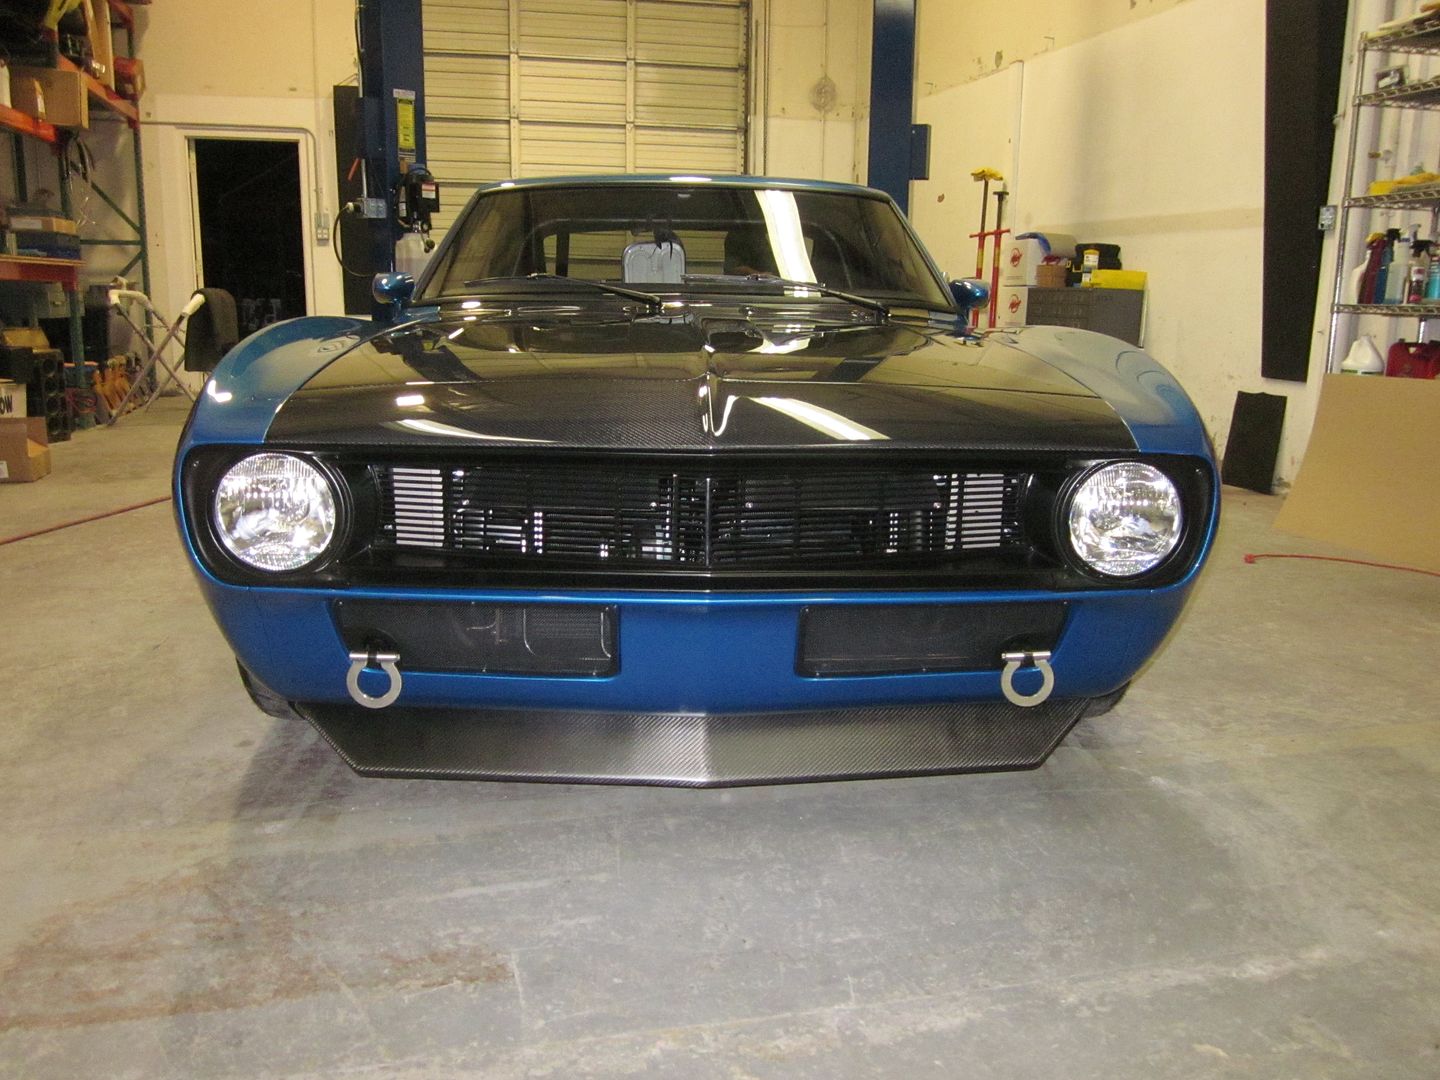 1968 Pro-touring Camaro front grill with LS7 engine swap